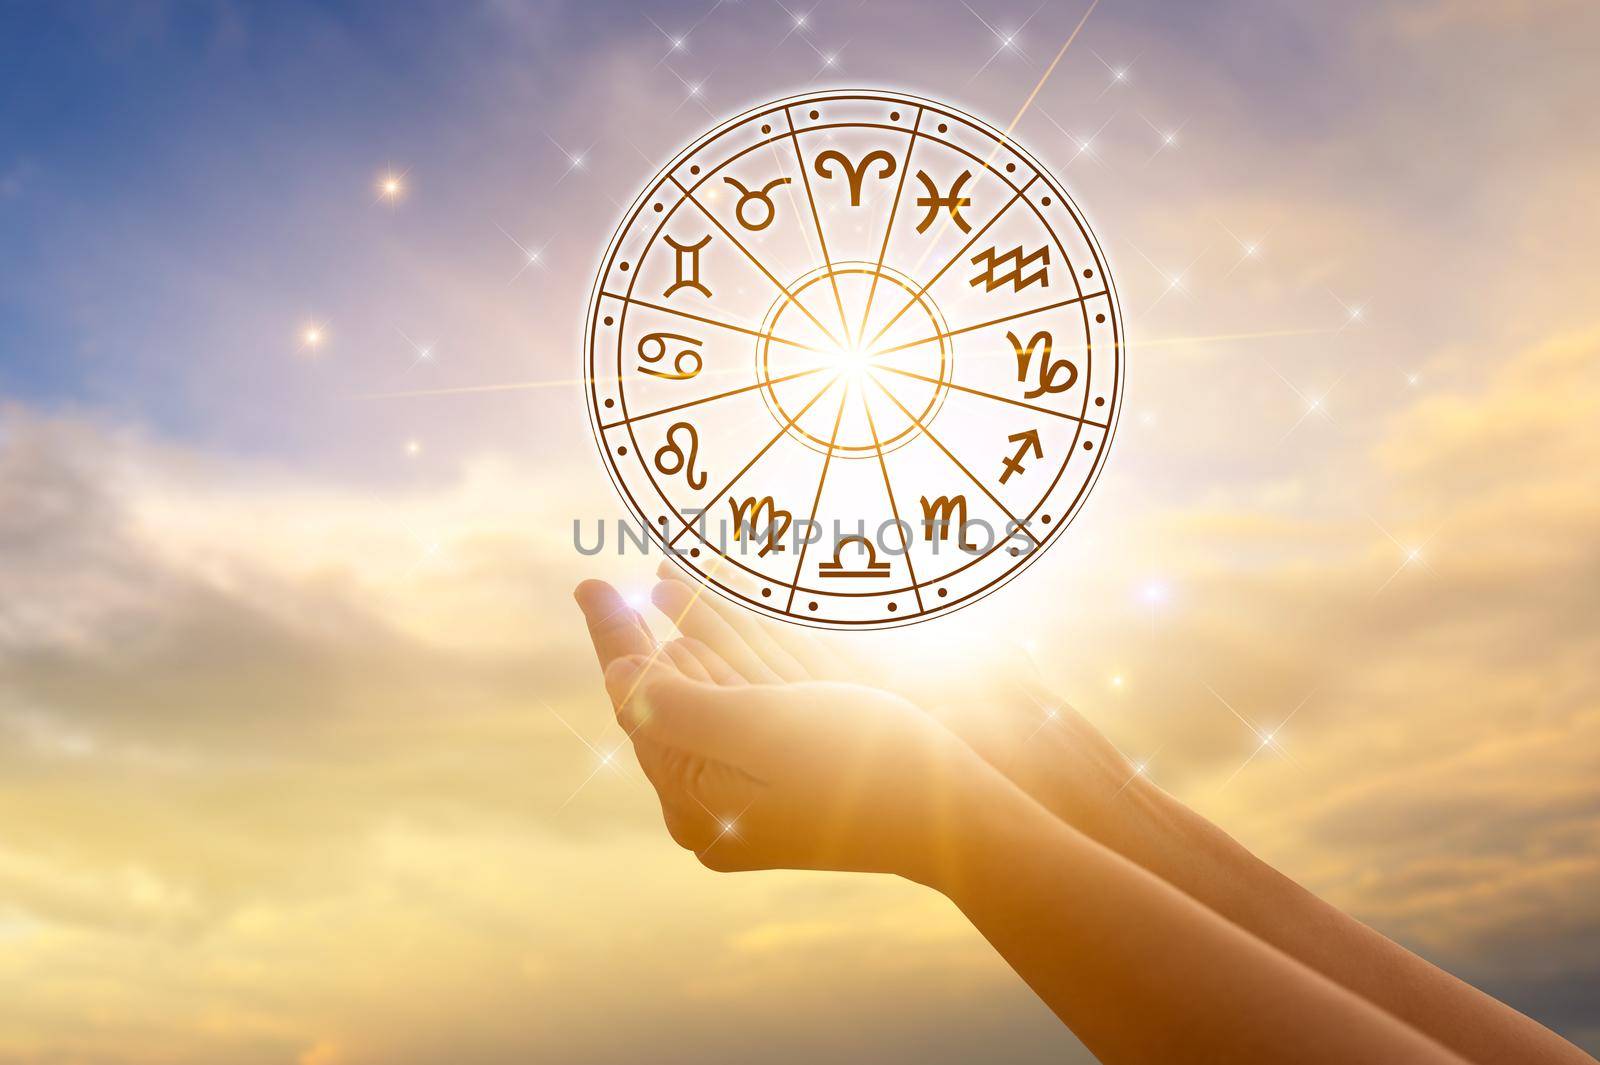 Zodiac signs inside of horoscope circle astrology and horoscopes concept by sarayut_thaneerat